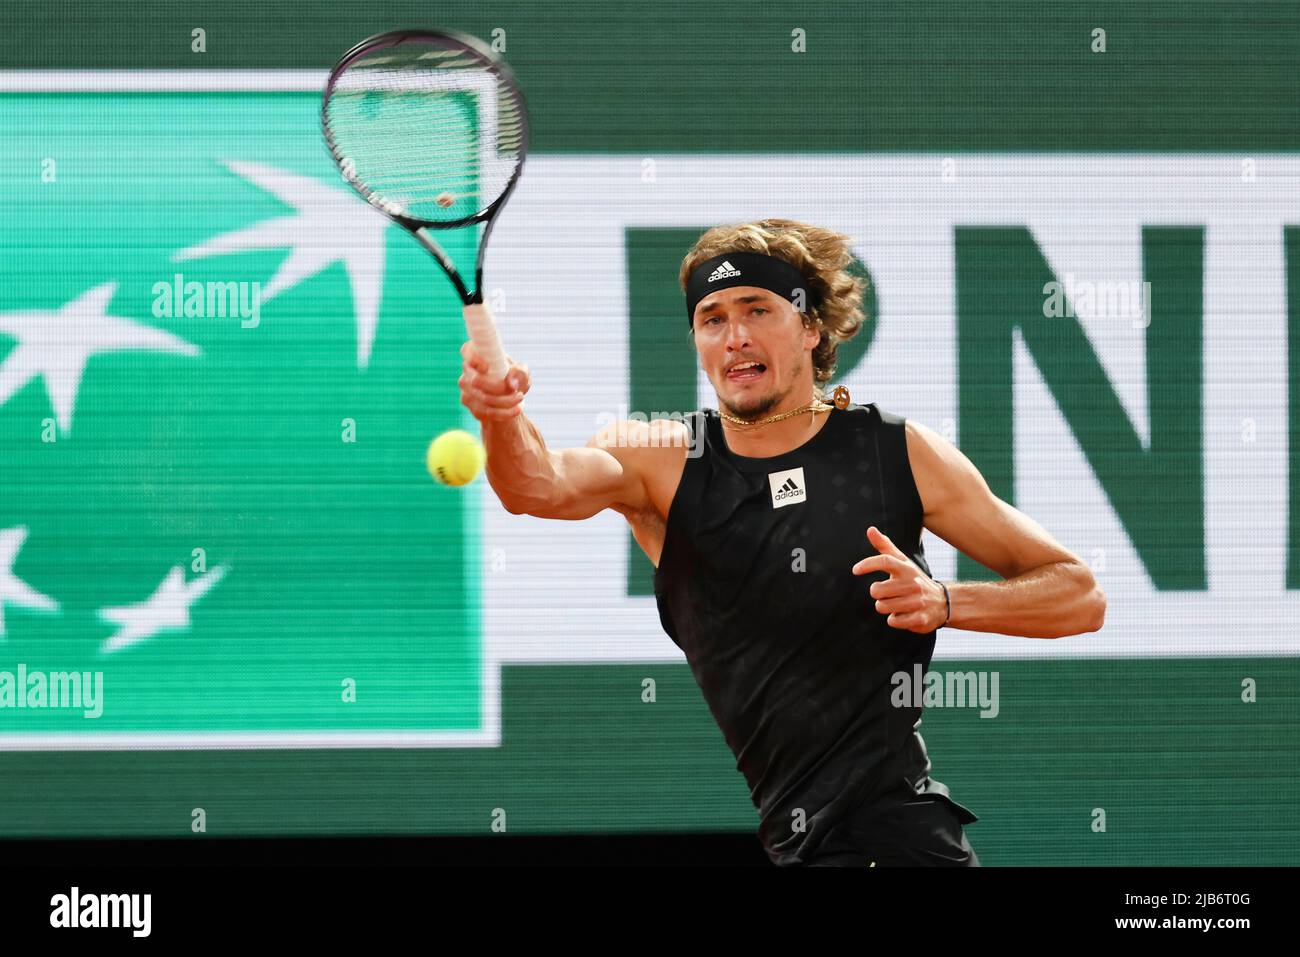 Paris, France. 3rd May, 2022. Tennis player Alexander Zverev from Germany  is in action at the 2022 French Open Grand Slam tennis tournament in Roland  Garros, Paris, France. Frank Molter/Alamy Live news